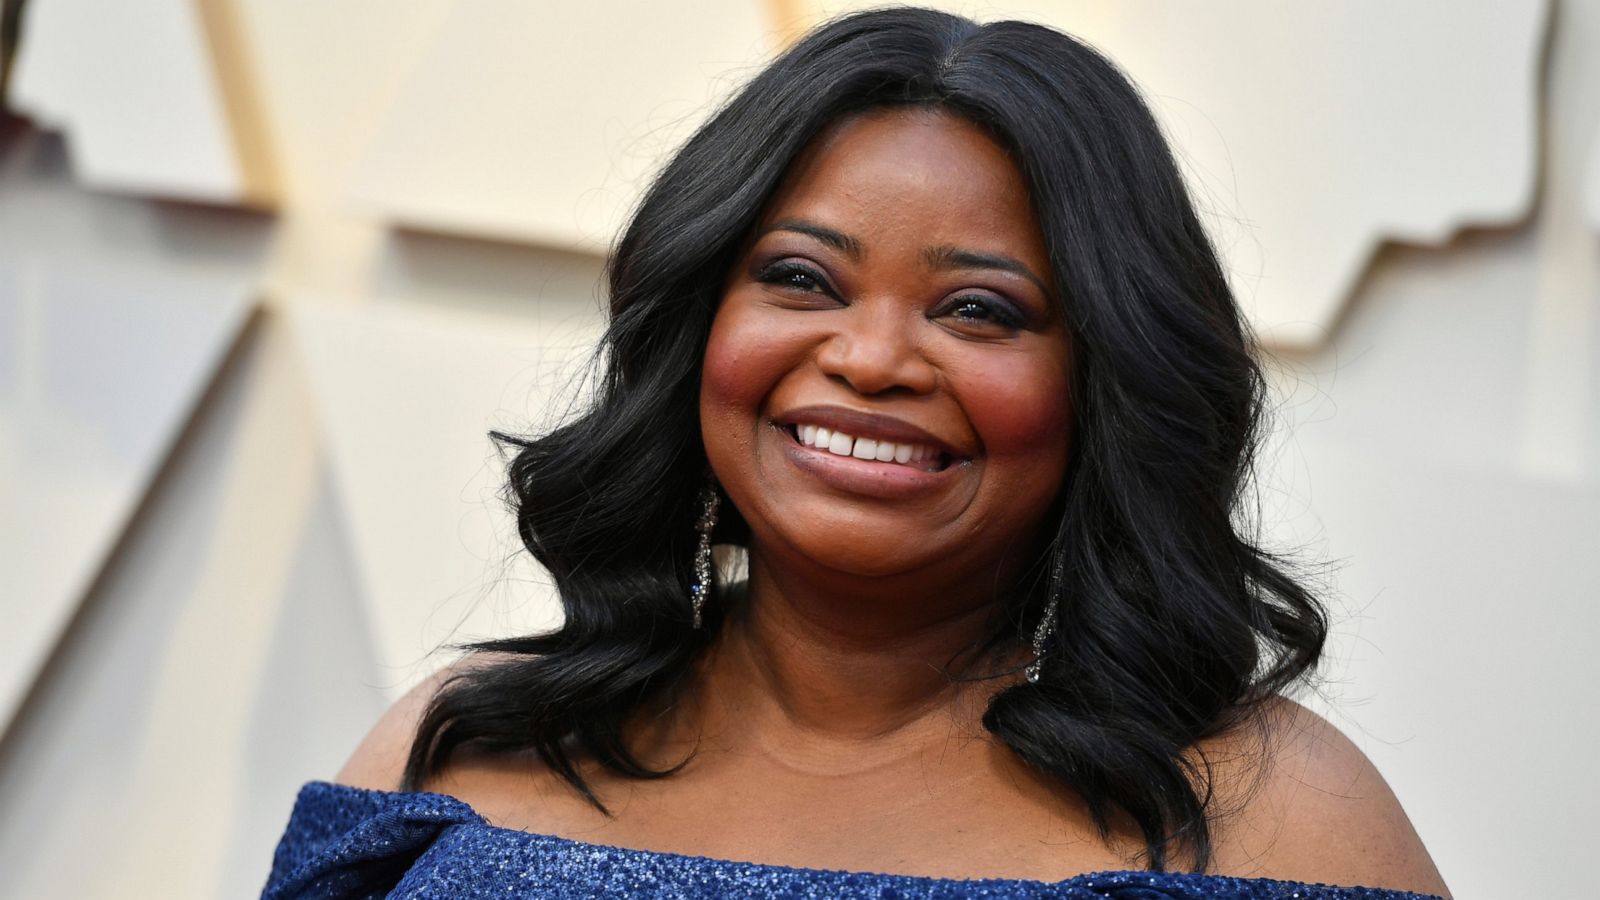 Octavia Spencer to receive honor from Producers Guild